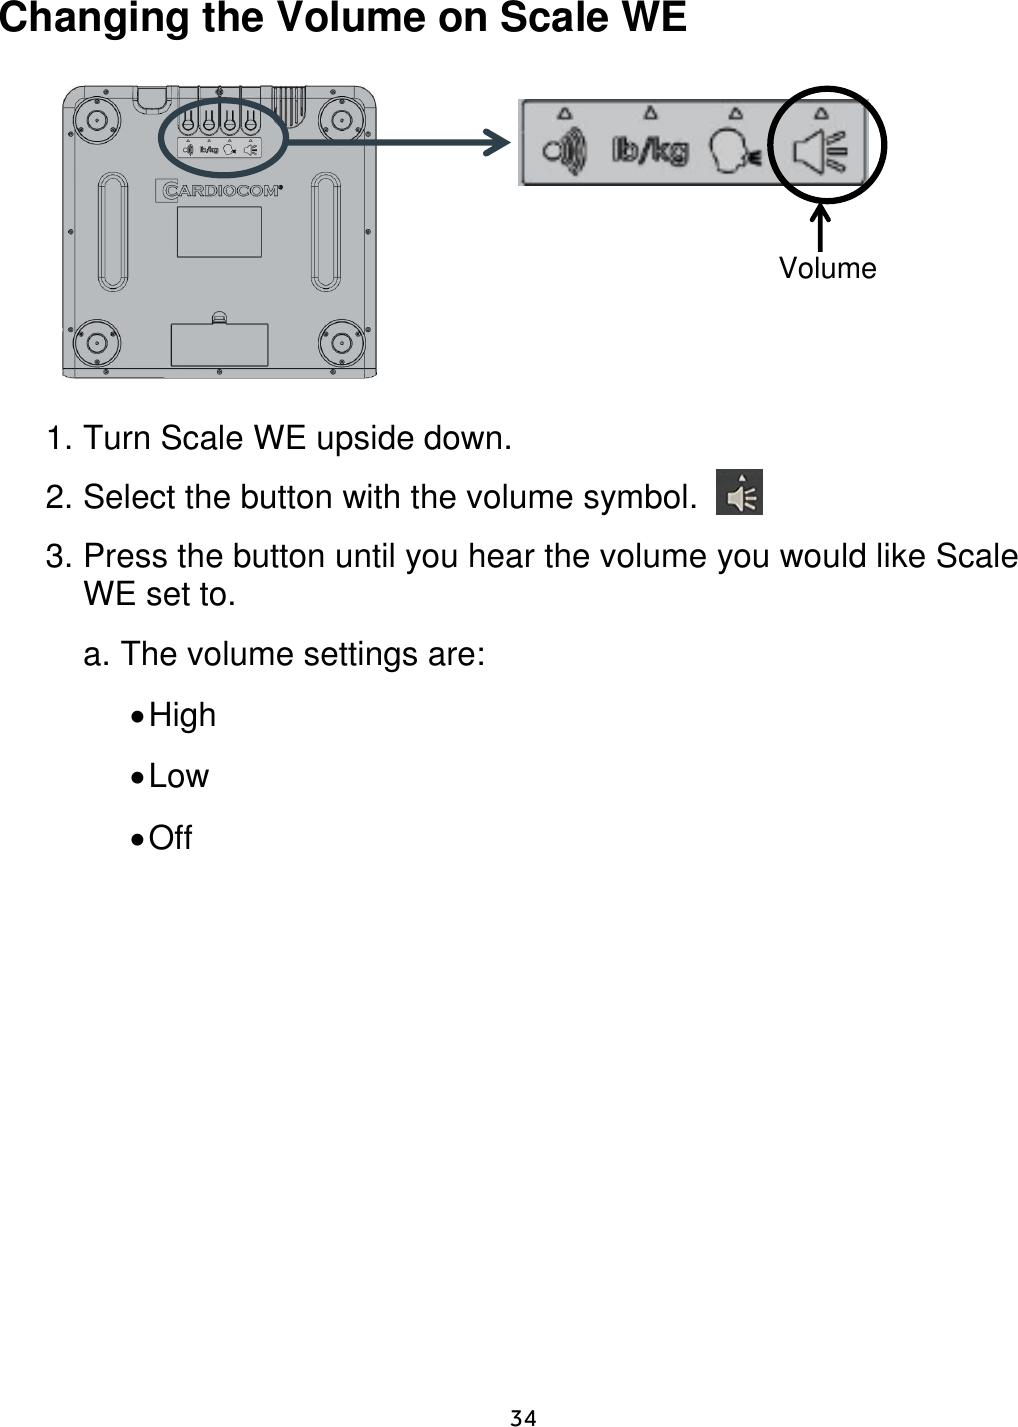     34  Changing the Volume on Scale WE                  1. Turn Scale WE upside down.    2. Select the button with the volume symbol. 3. Press the button until you hear the volume you would like Scale WE set to.     a. The volume settings are:   High  Low  Off           Volume 